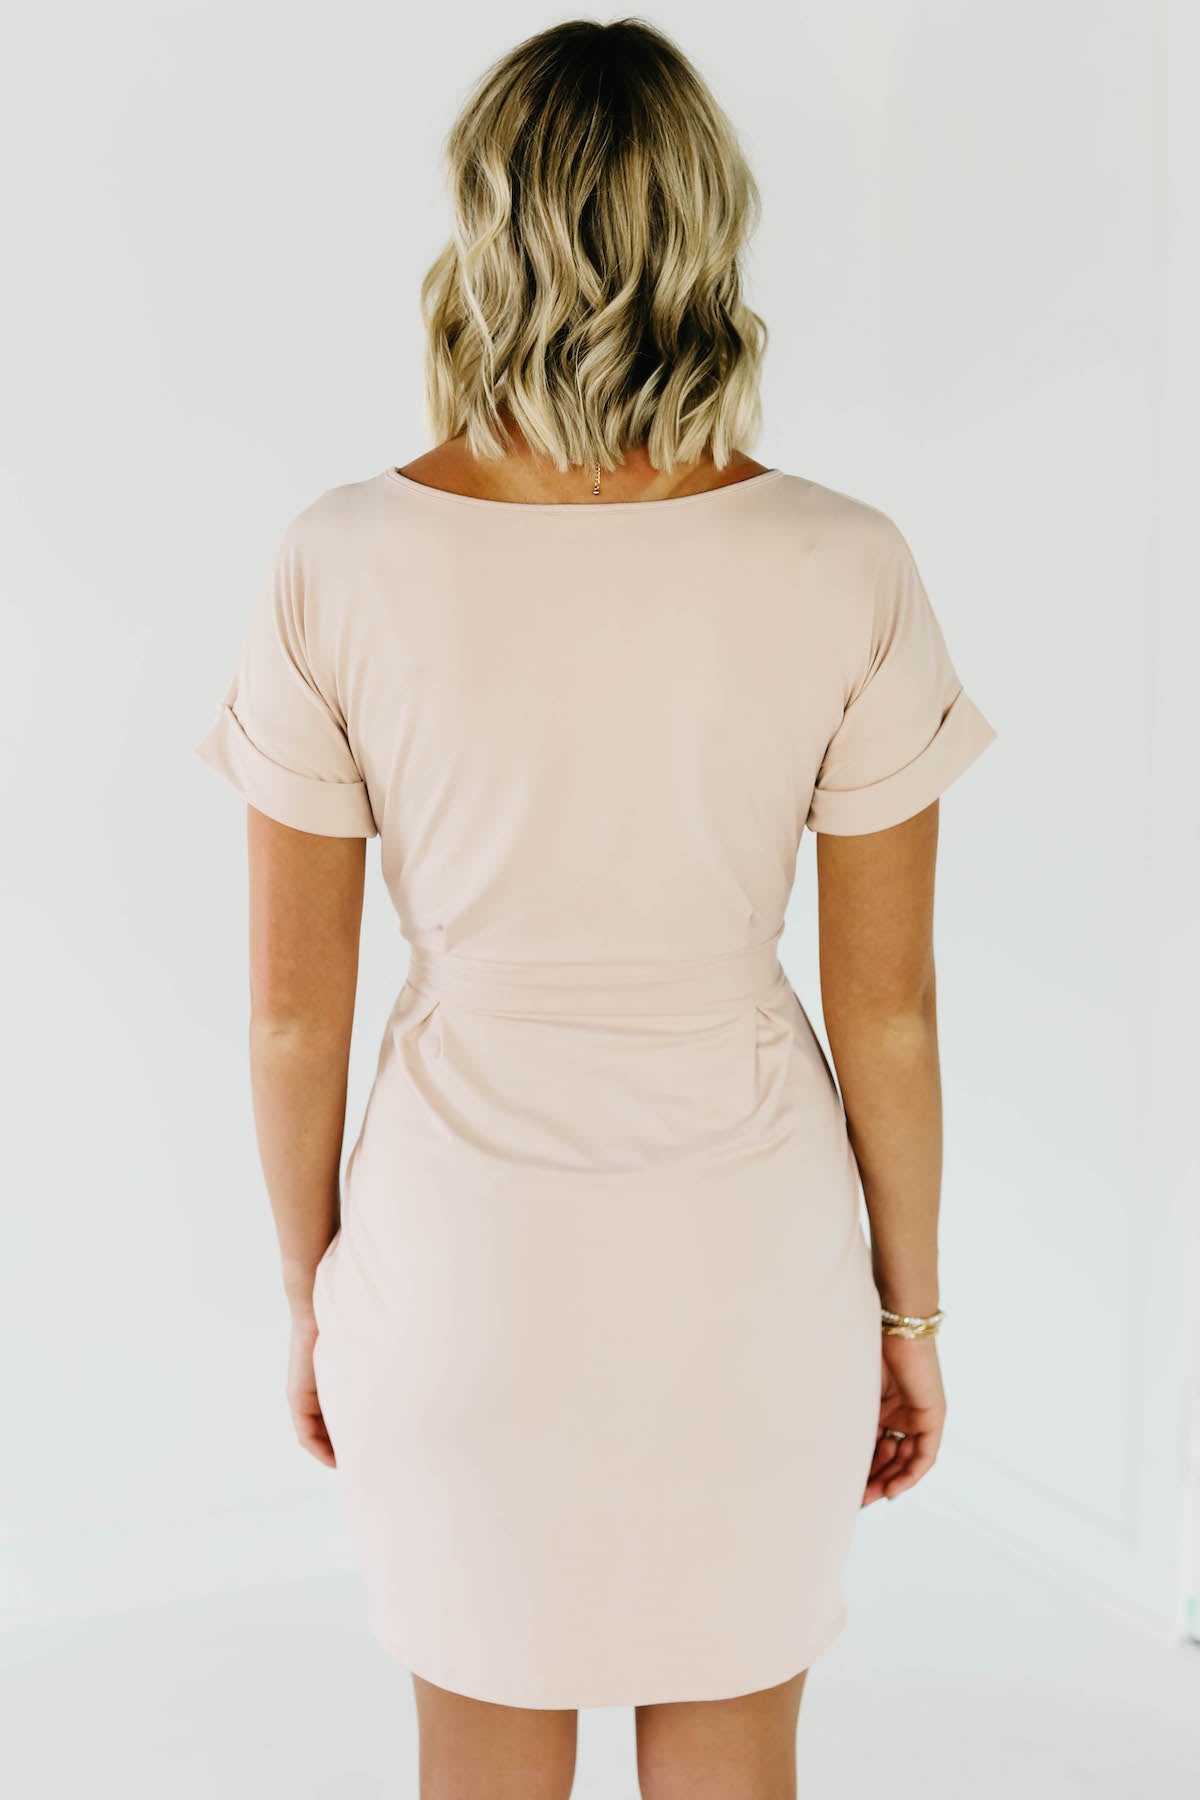 The Lacey Round Neck Dress